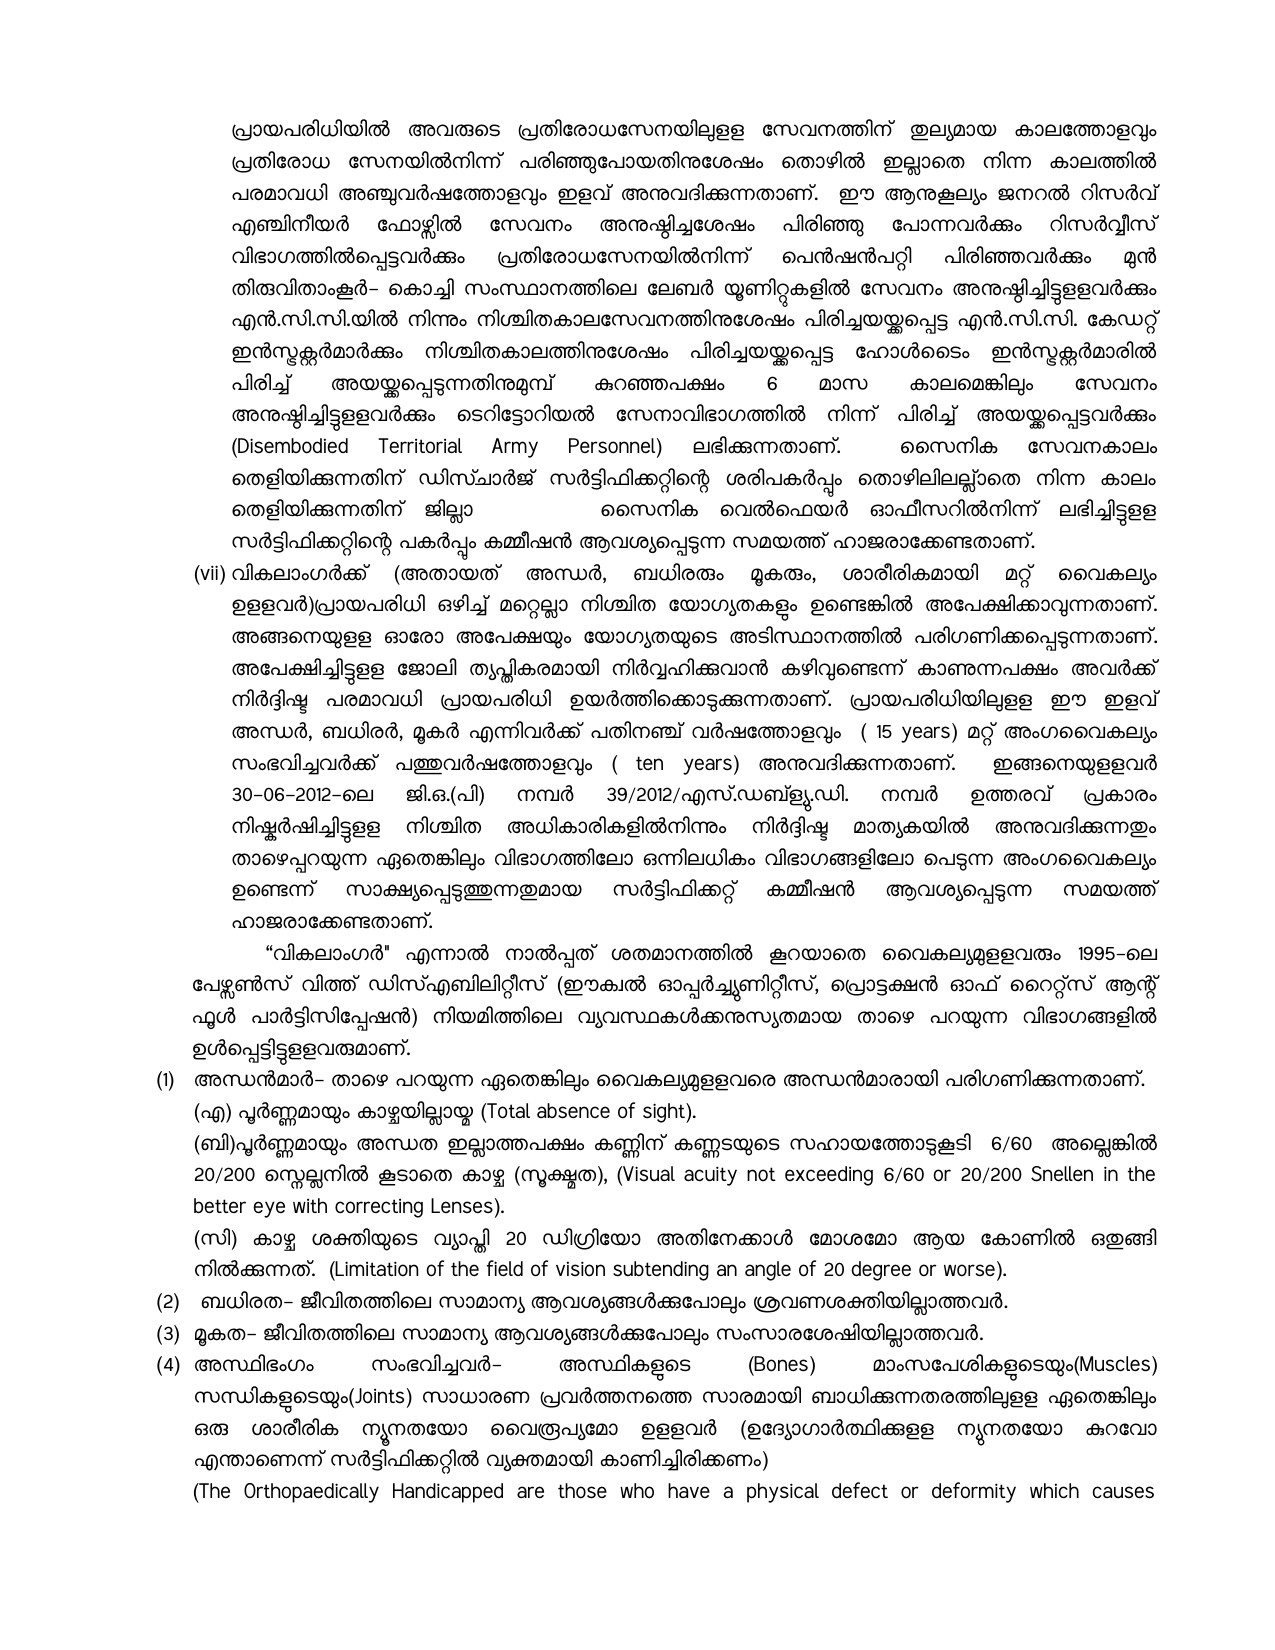 General Conditions and Certificate Formats in Malayalam - Notification Image 3